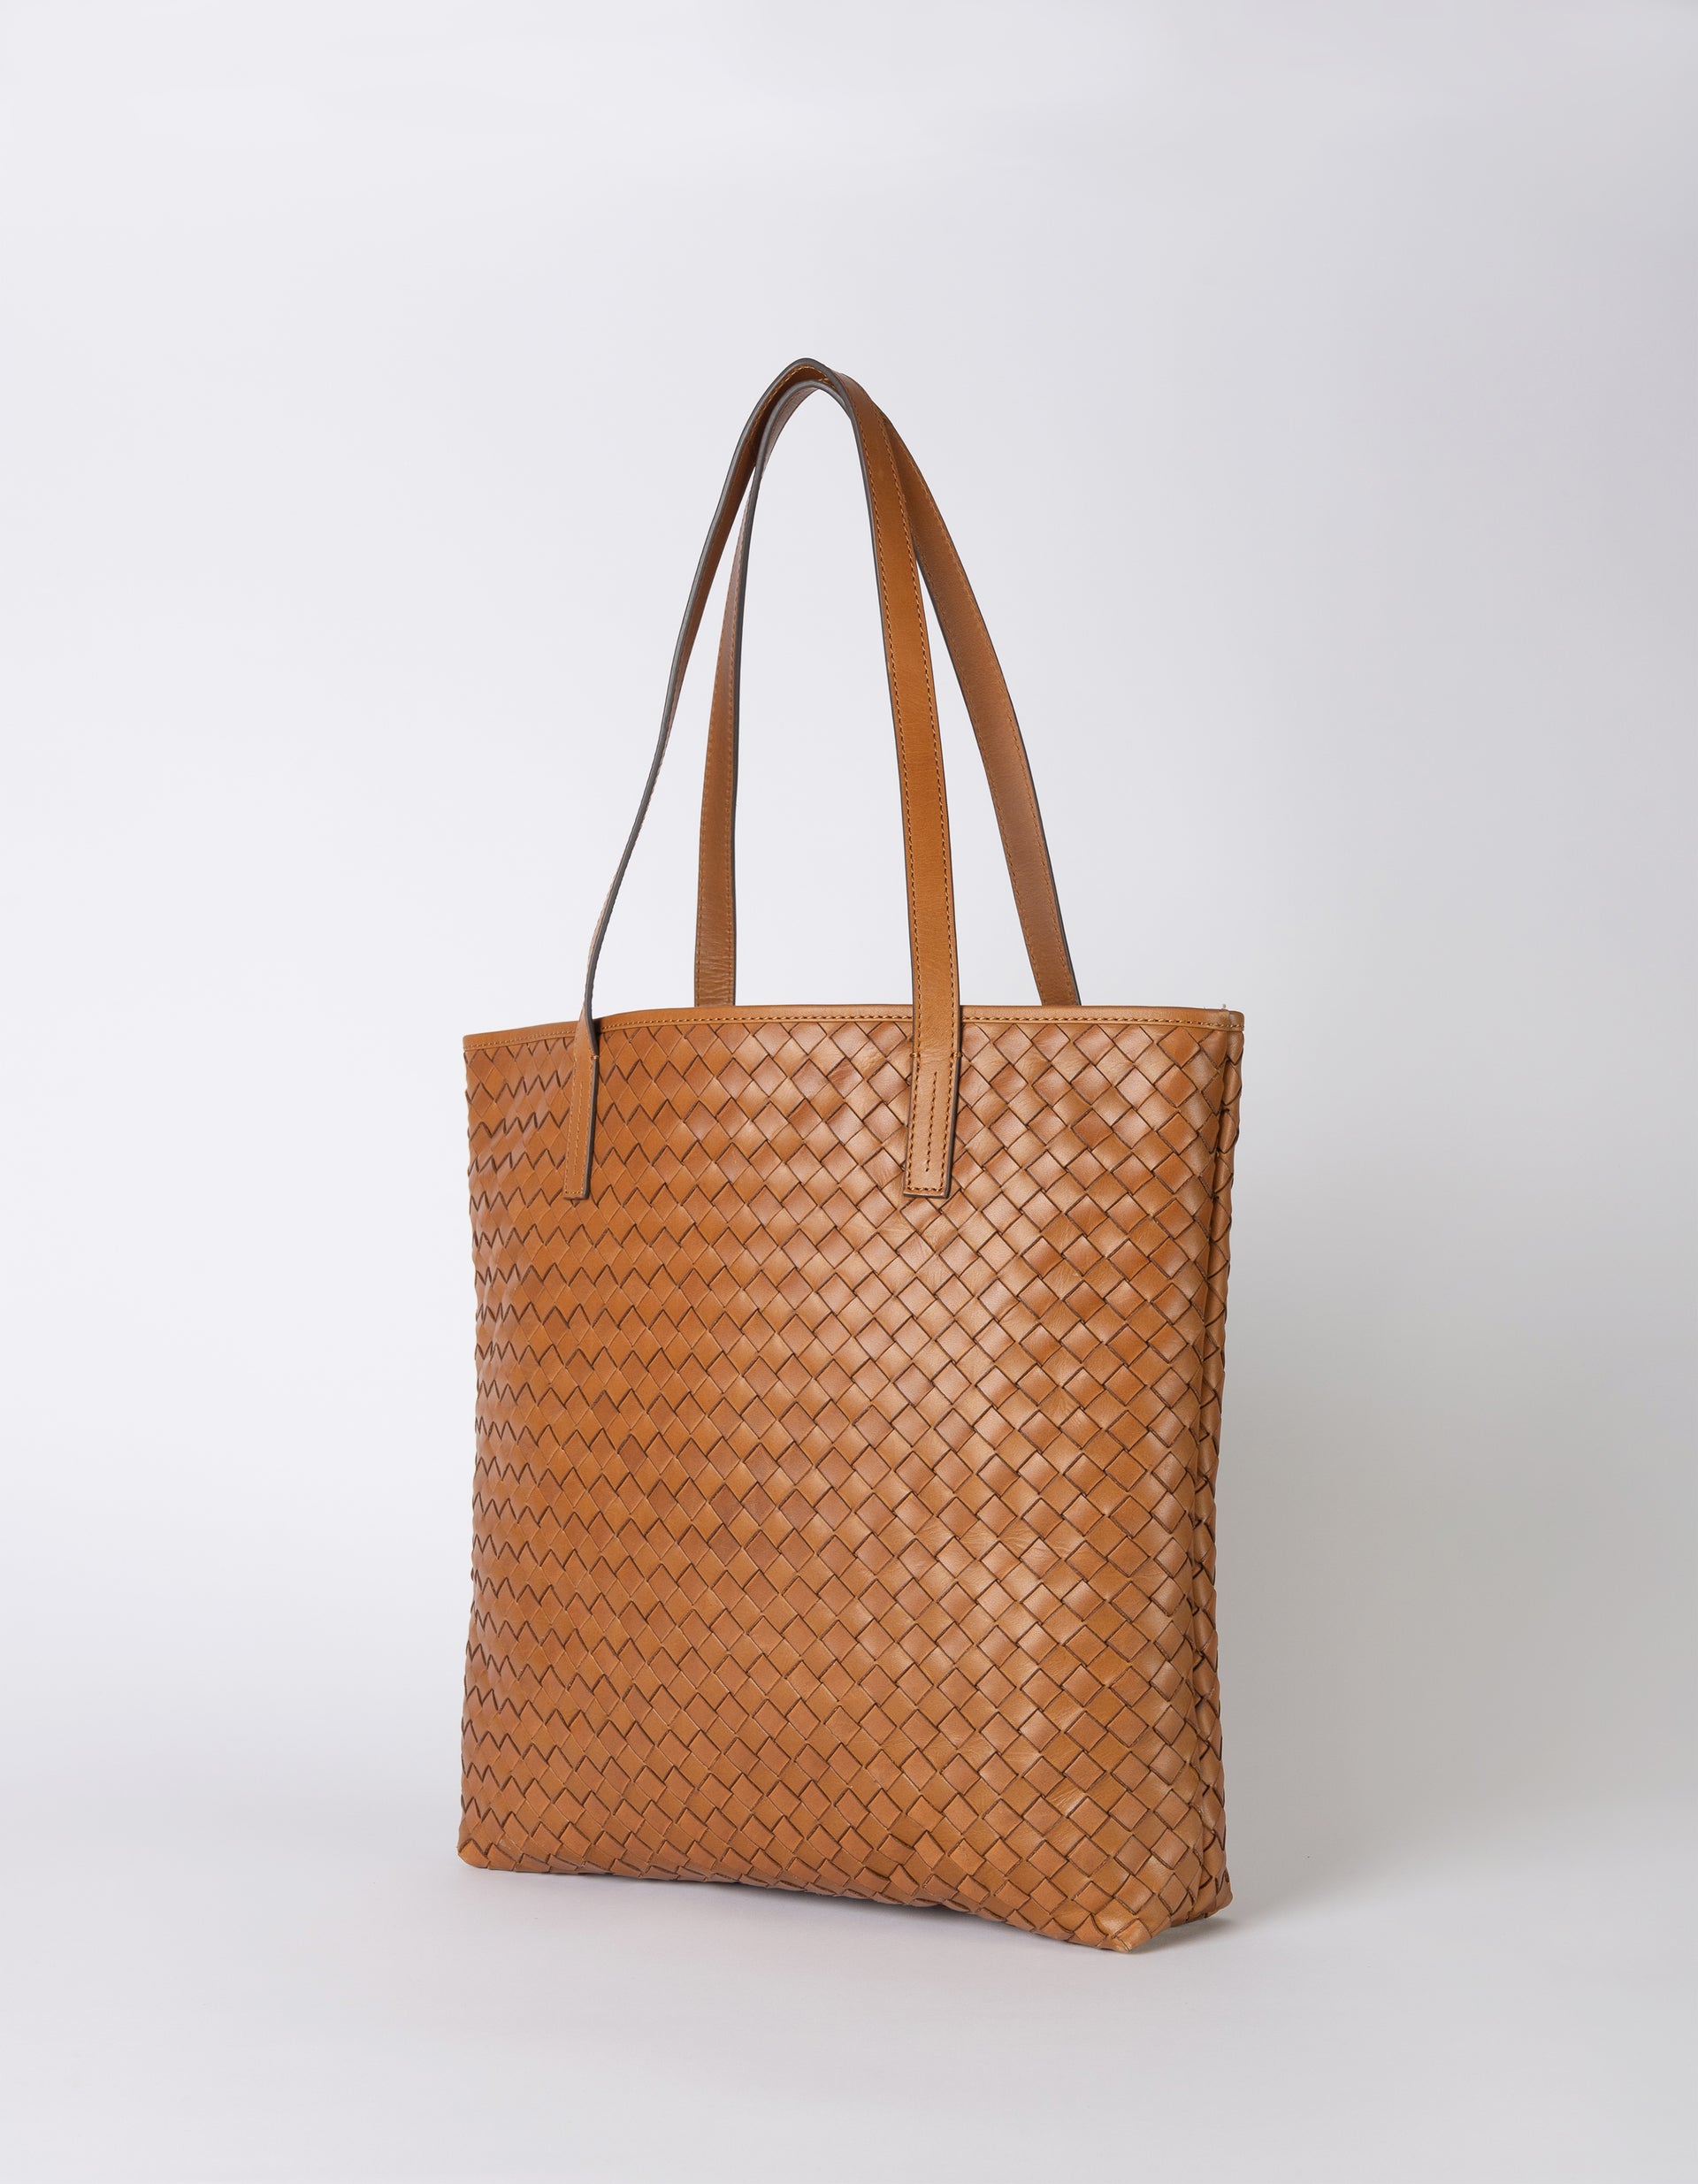 Georgia in cognac woven leather - side image